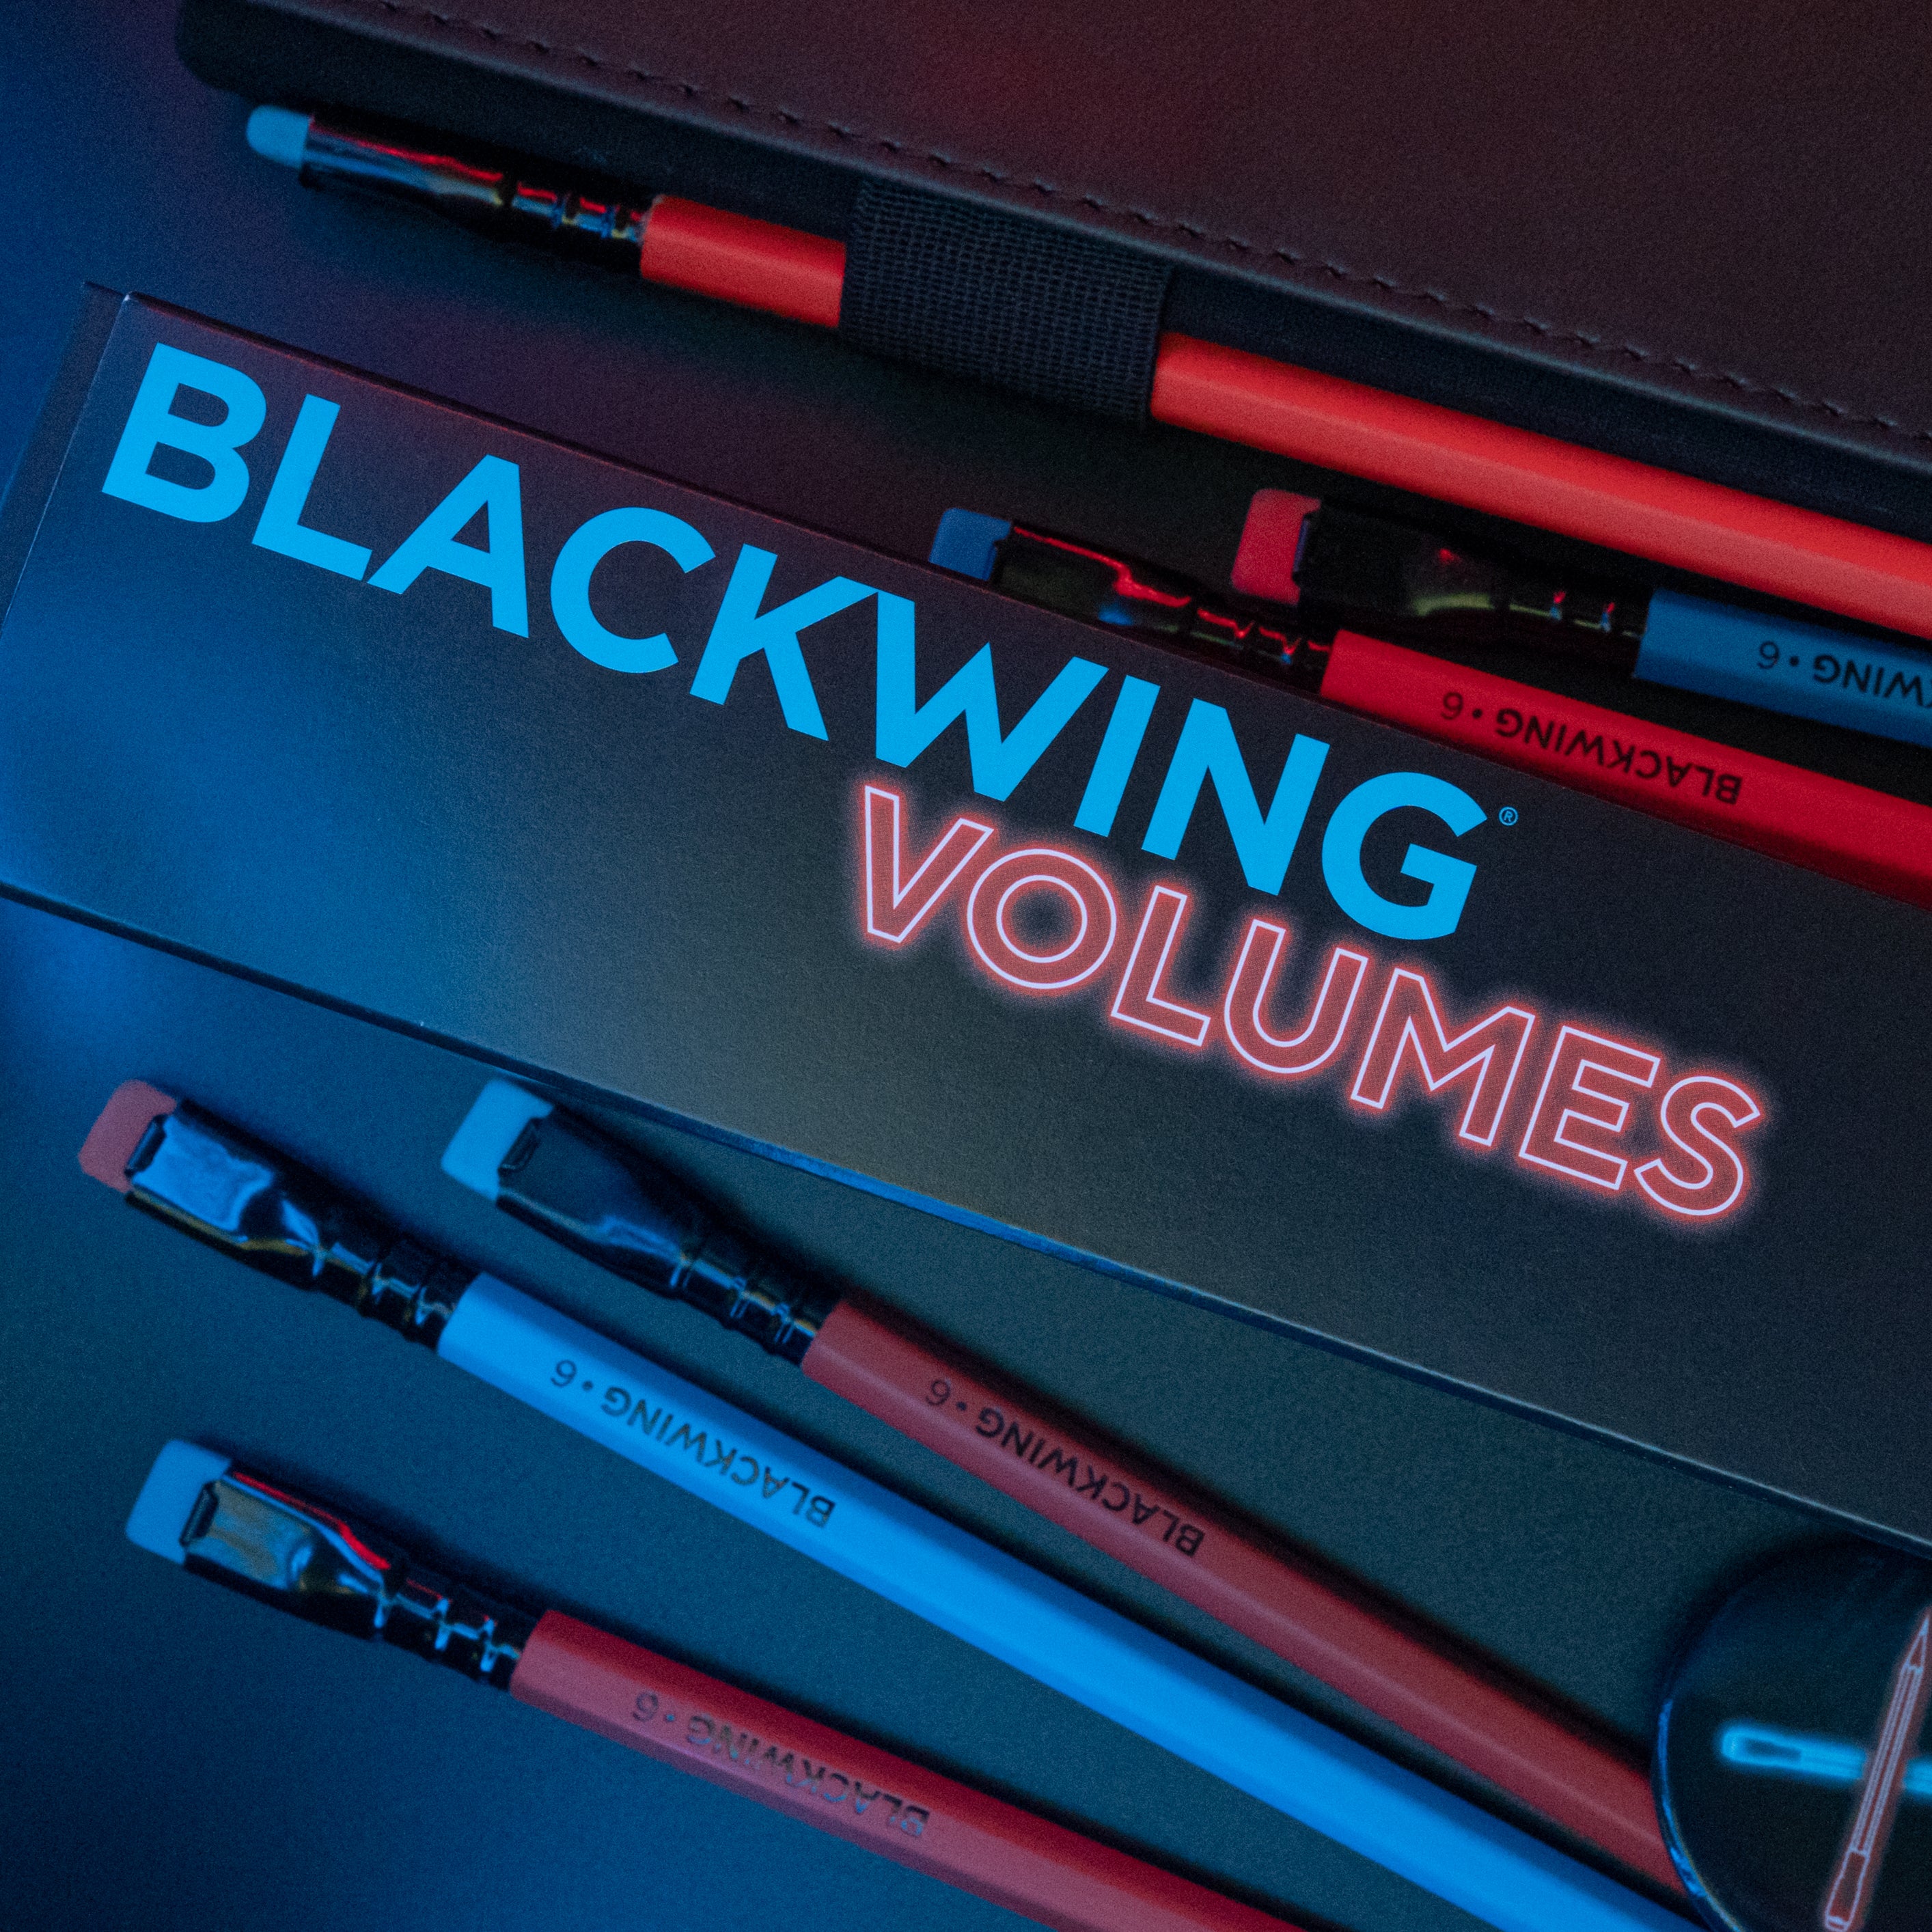 Blackwing Volume 6 (Set of 12) - a collection of pencils and pens from a small business specializing in stationery products.